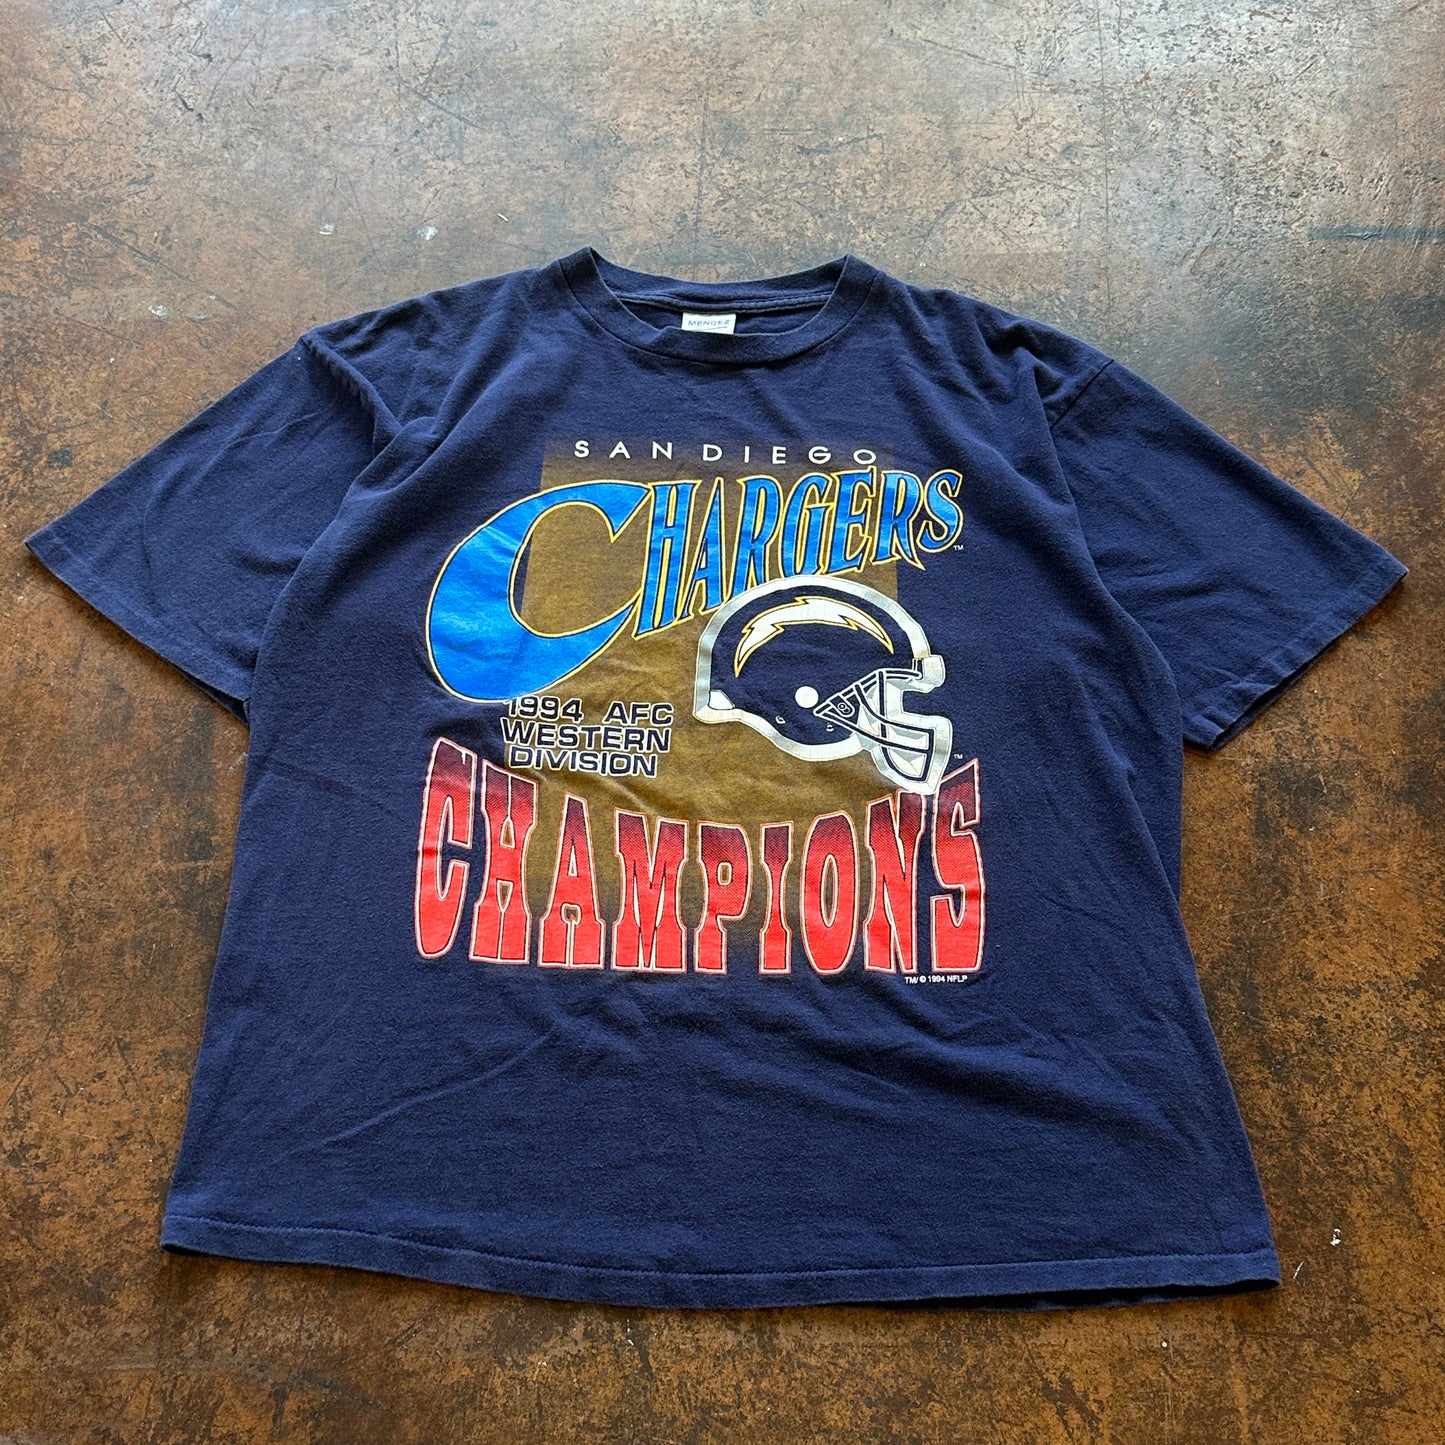 94’ Chargers Tee